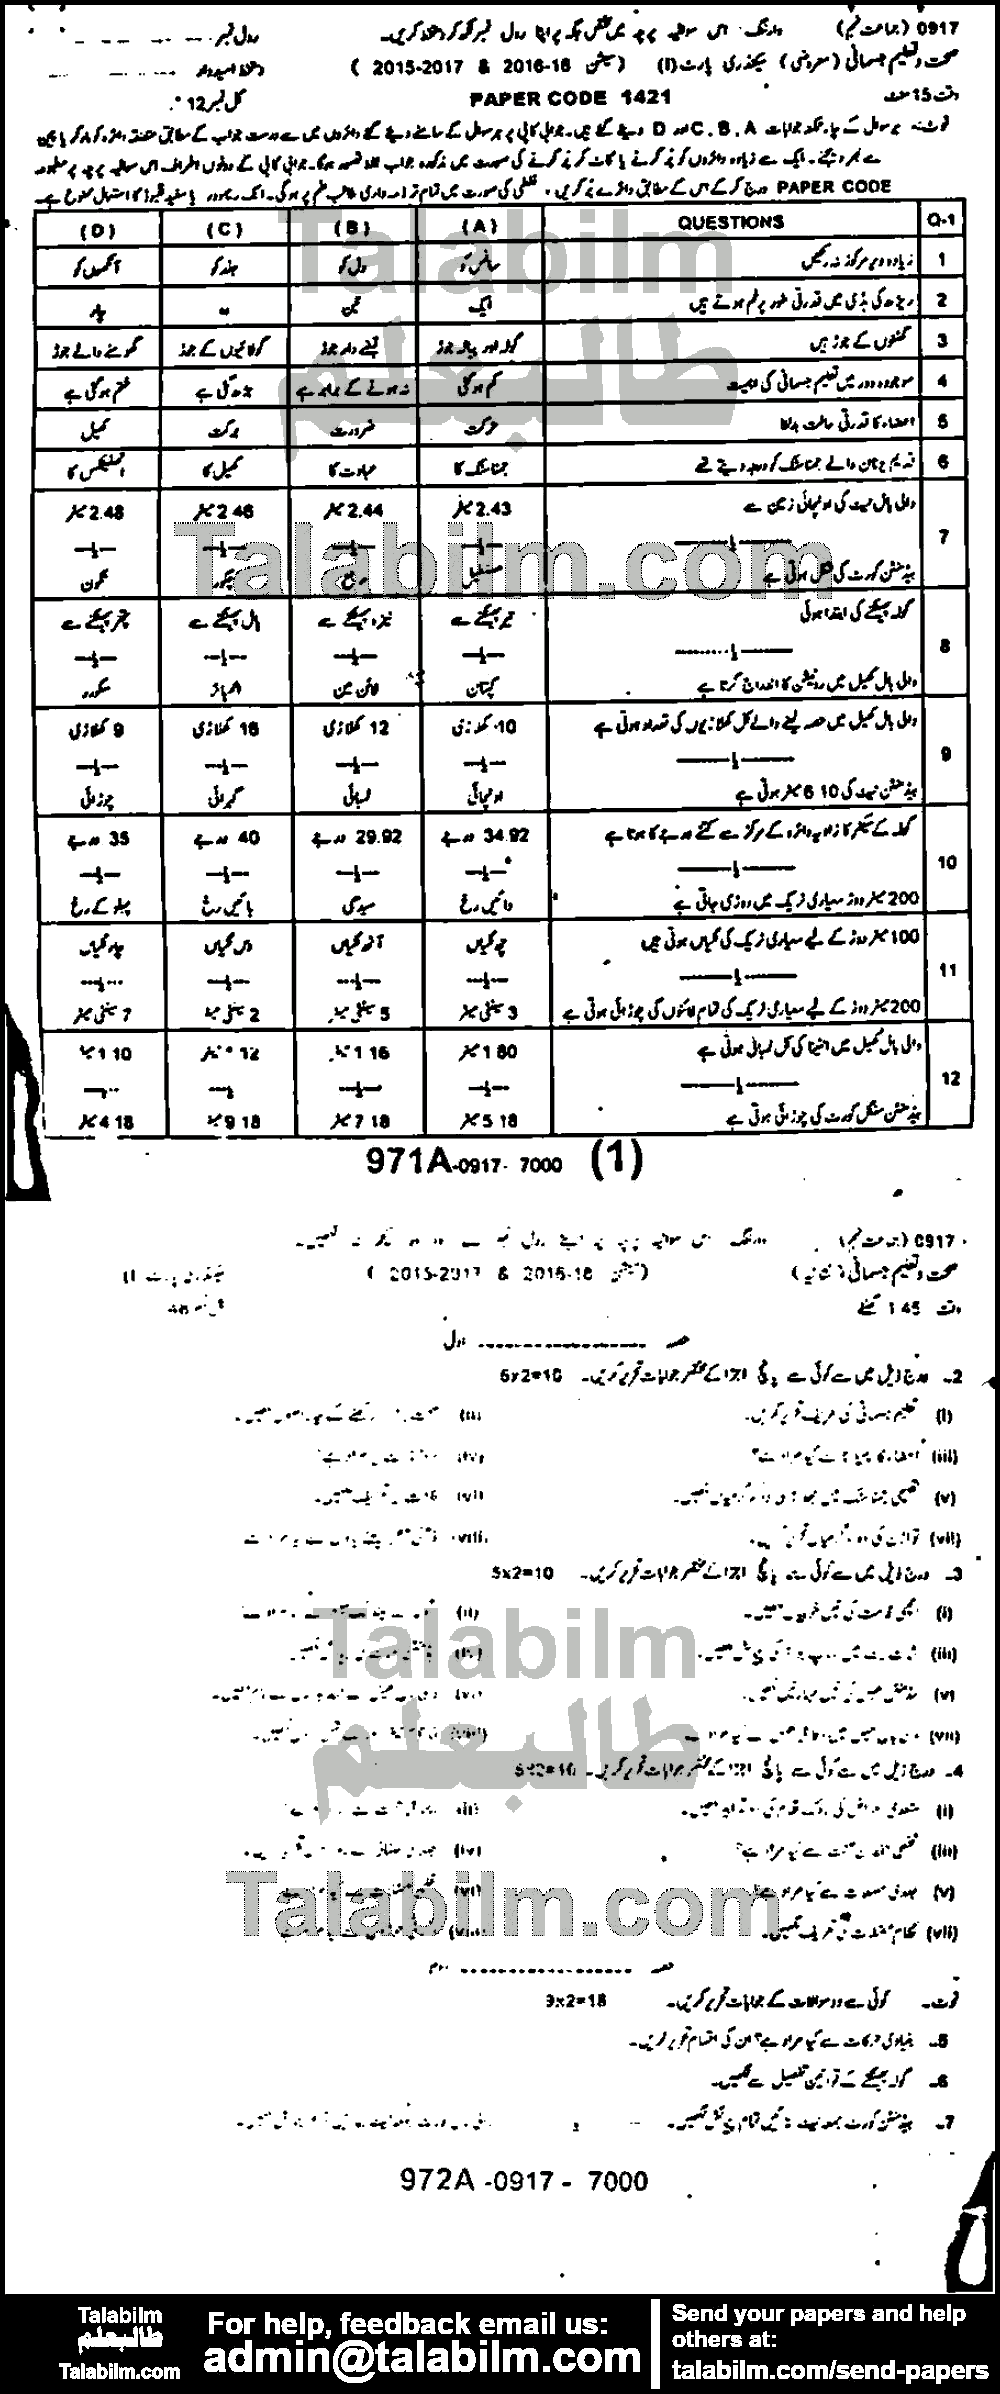 Health And Physical Education 0 past paper for Urdu Medium 2017 Group-I